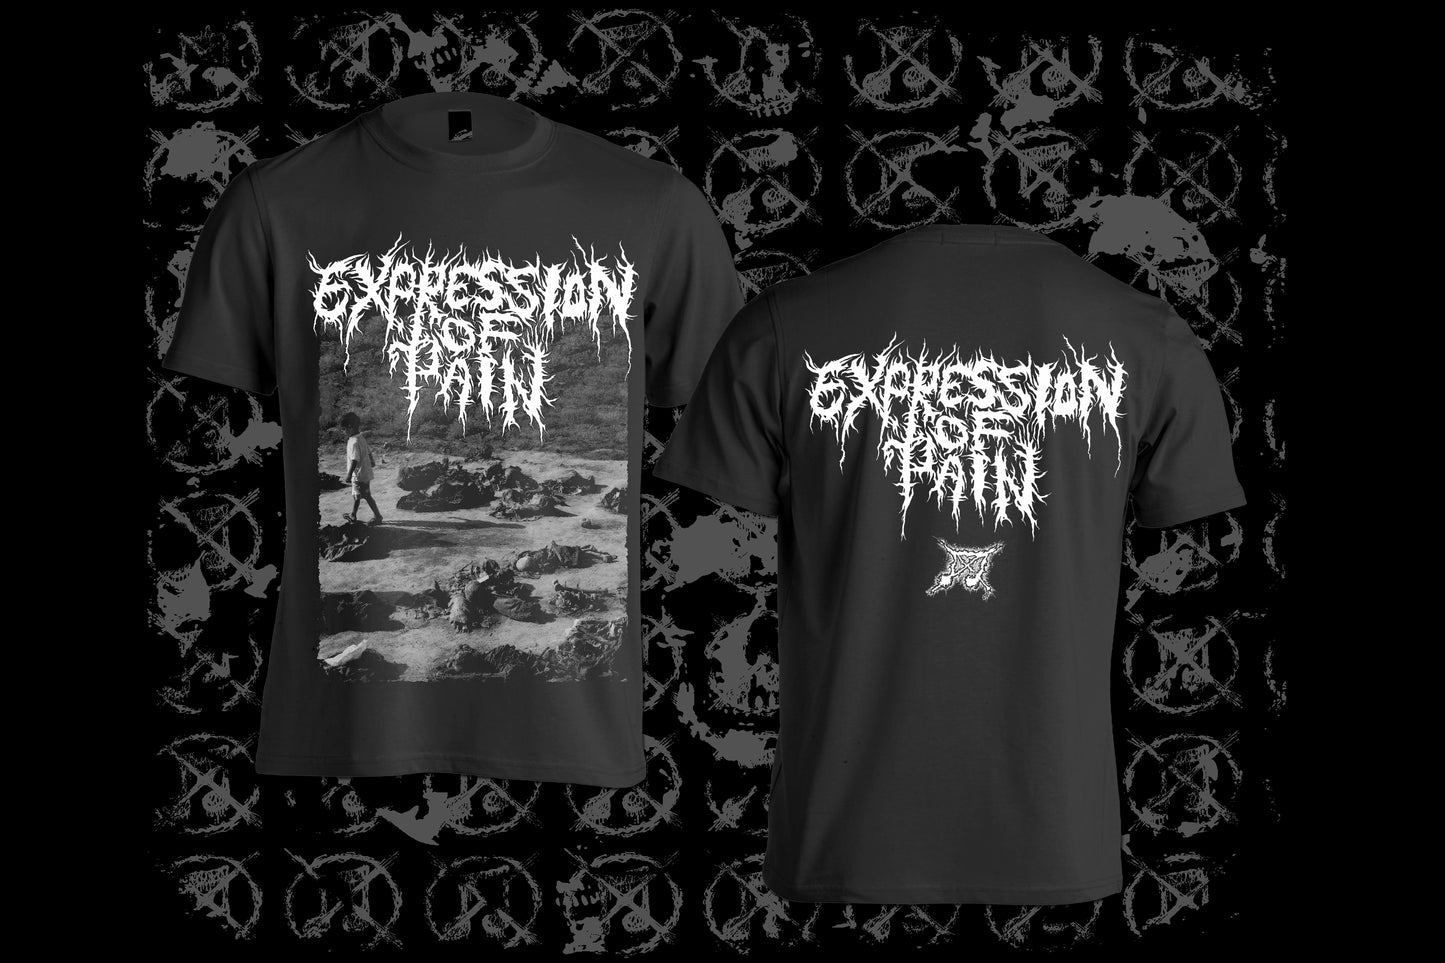 EXPRESSION OF PAIN - T-shirt